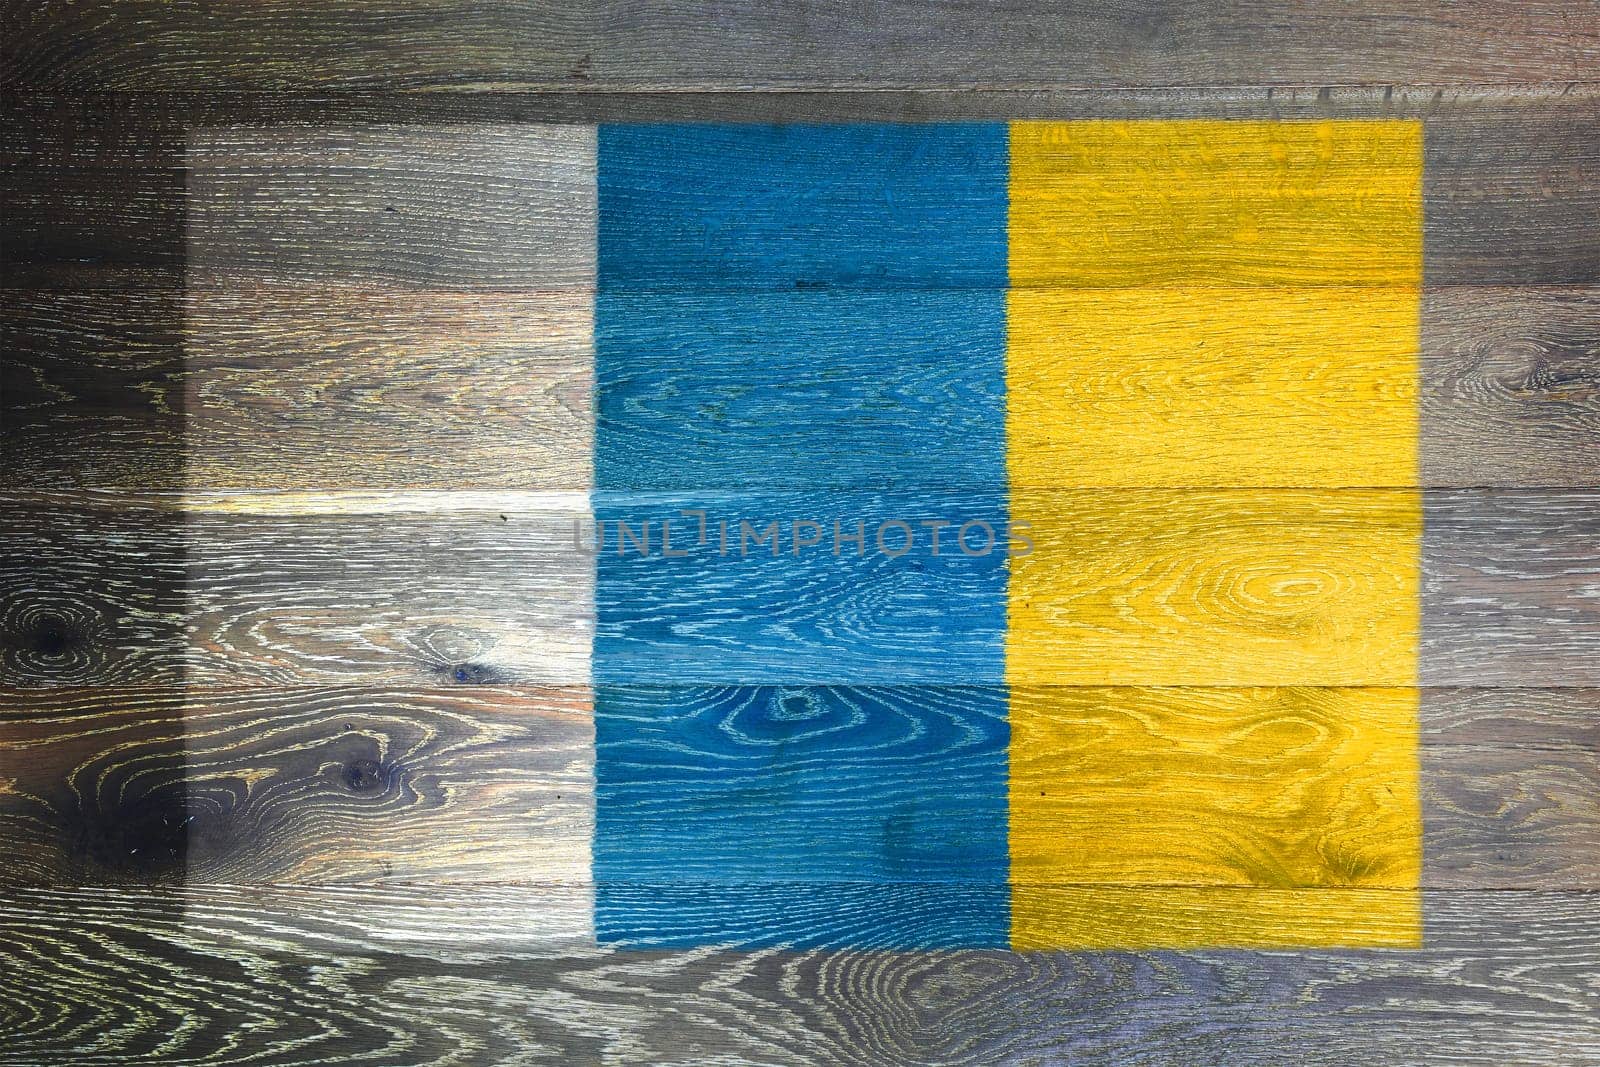 Canary Islands flag on rustic old wood surface background by VivacityImages